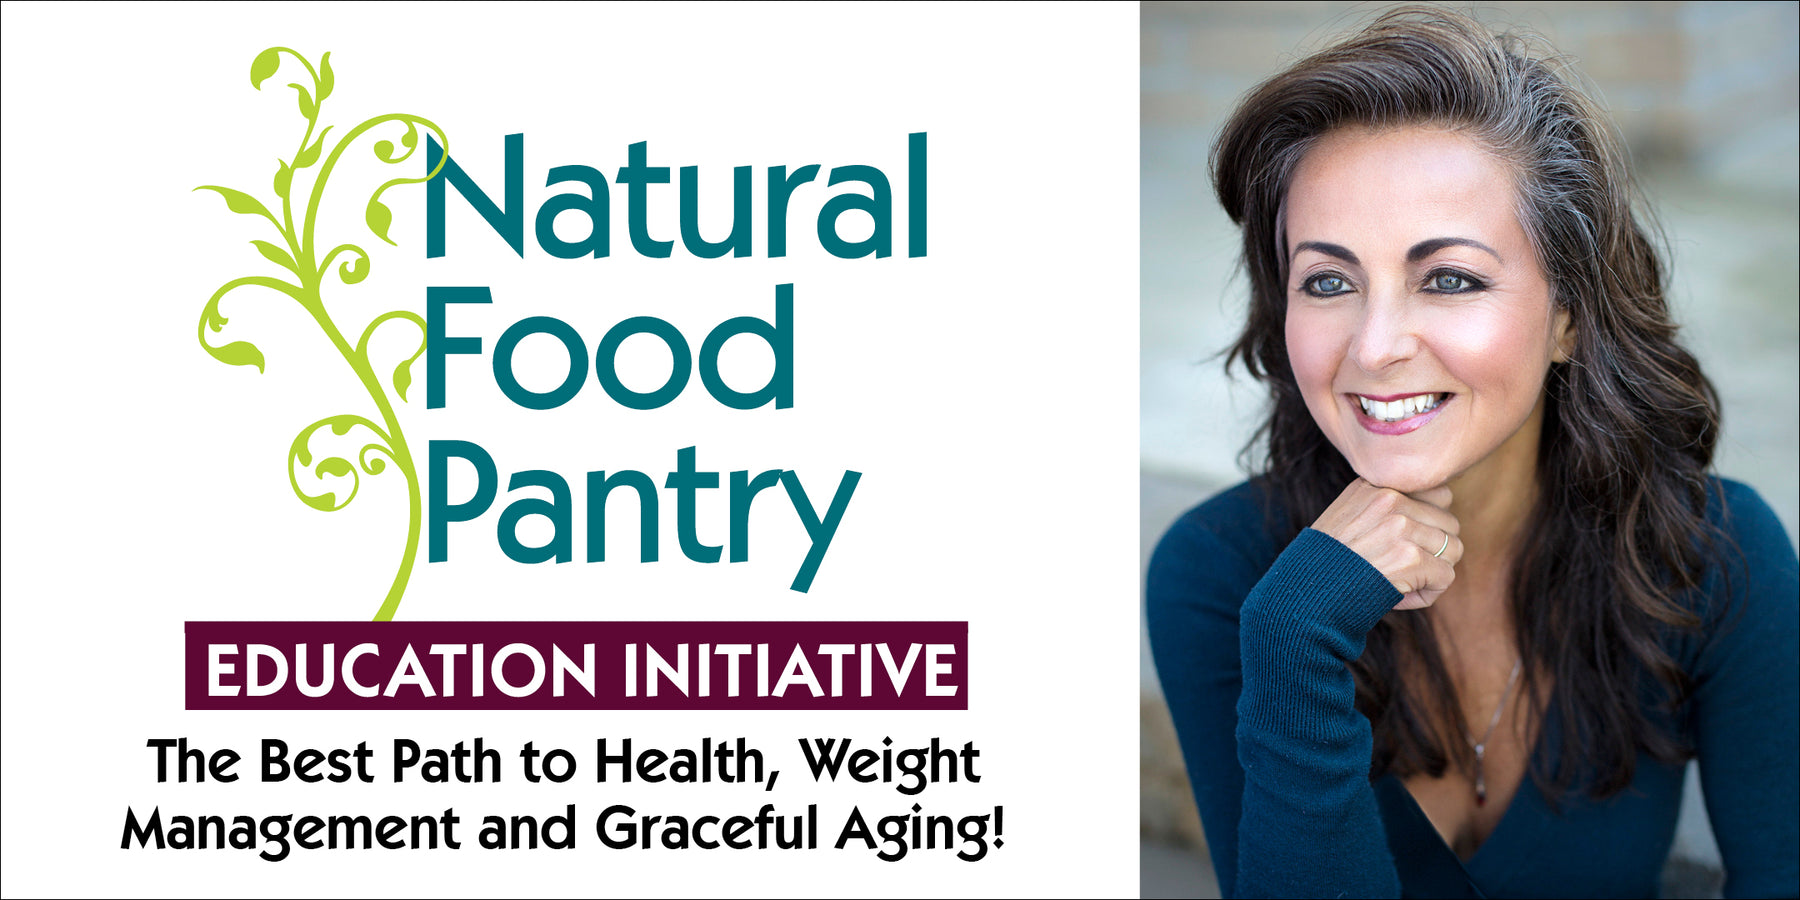 Jan 9: The Best Path to Health, Weight Management and Graceful Aging!